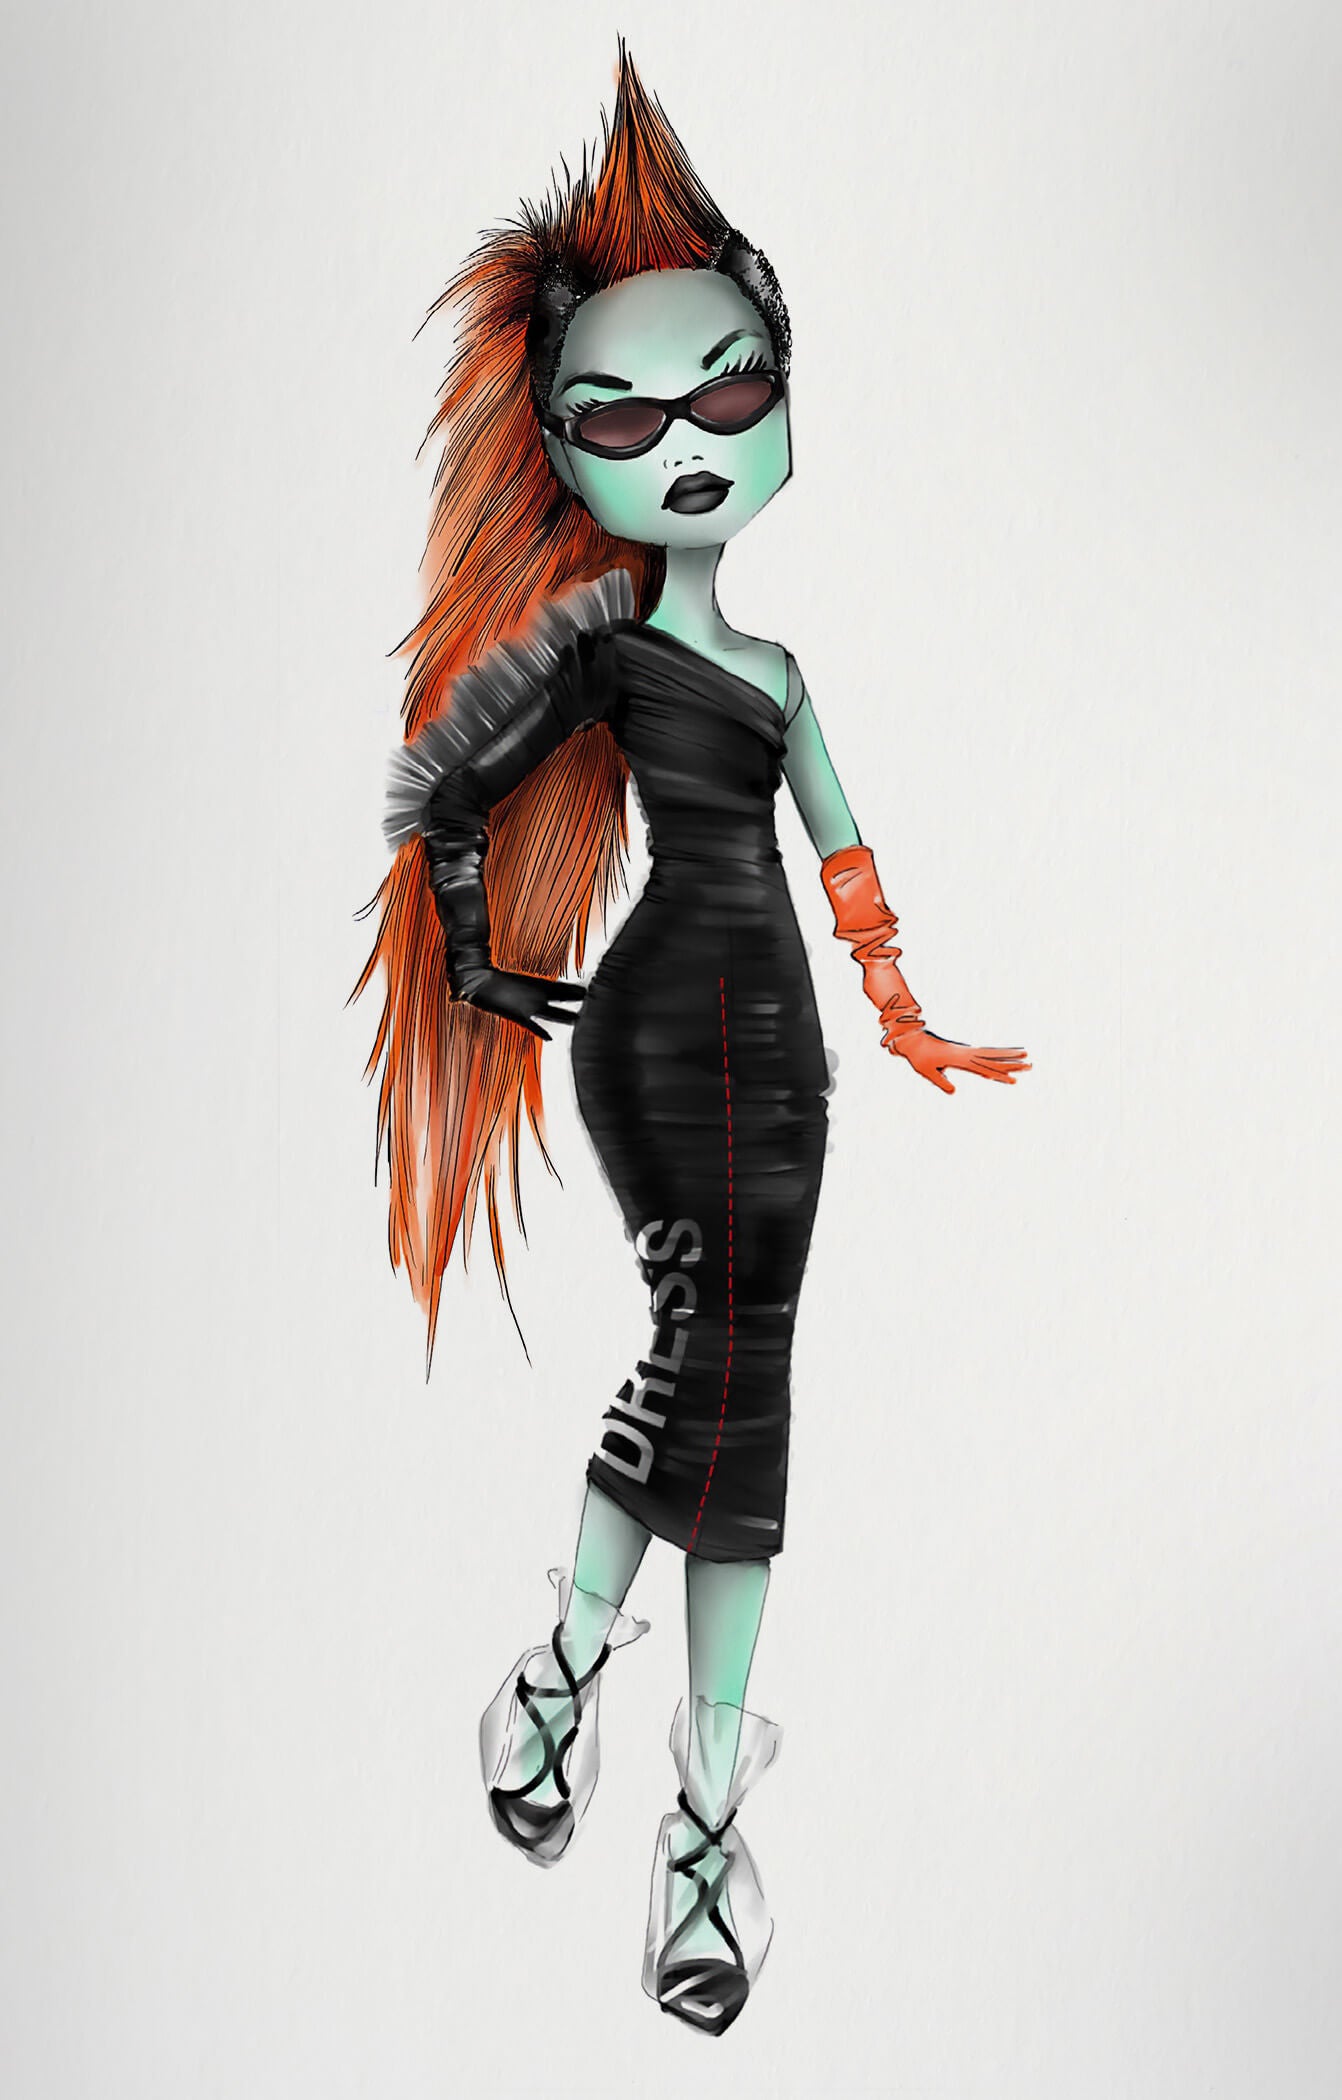 Off-White c/o Monster High Electra Melody Doll – Mattel Creations